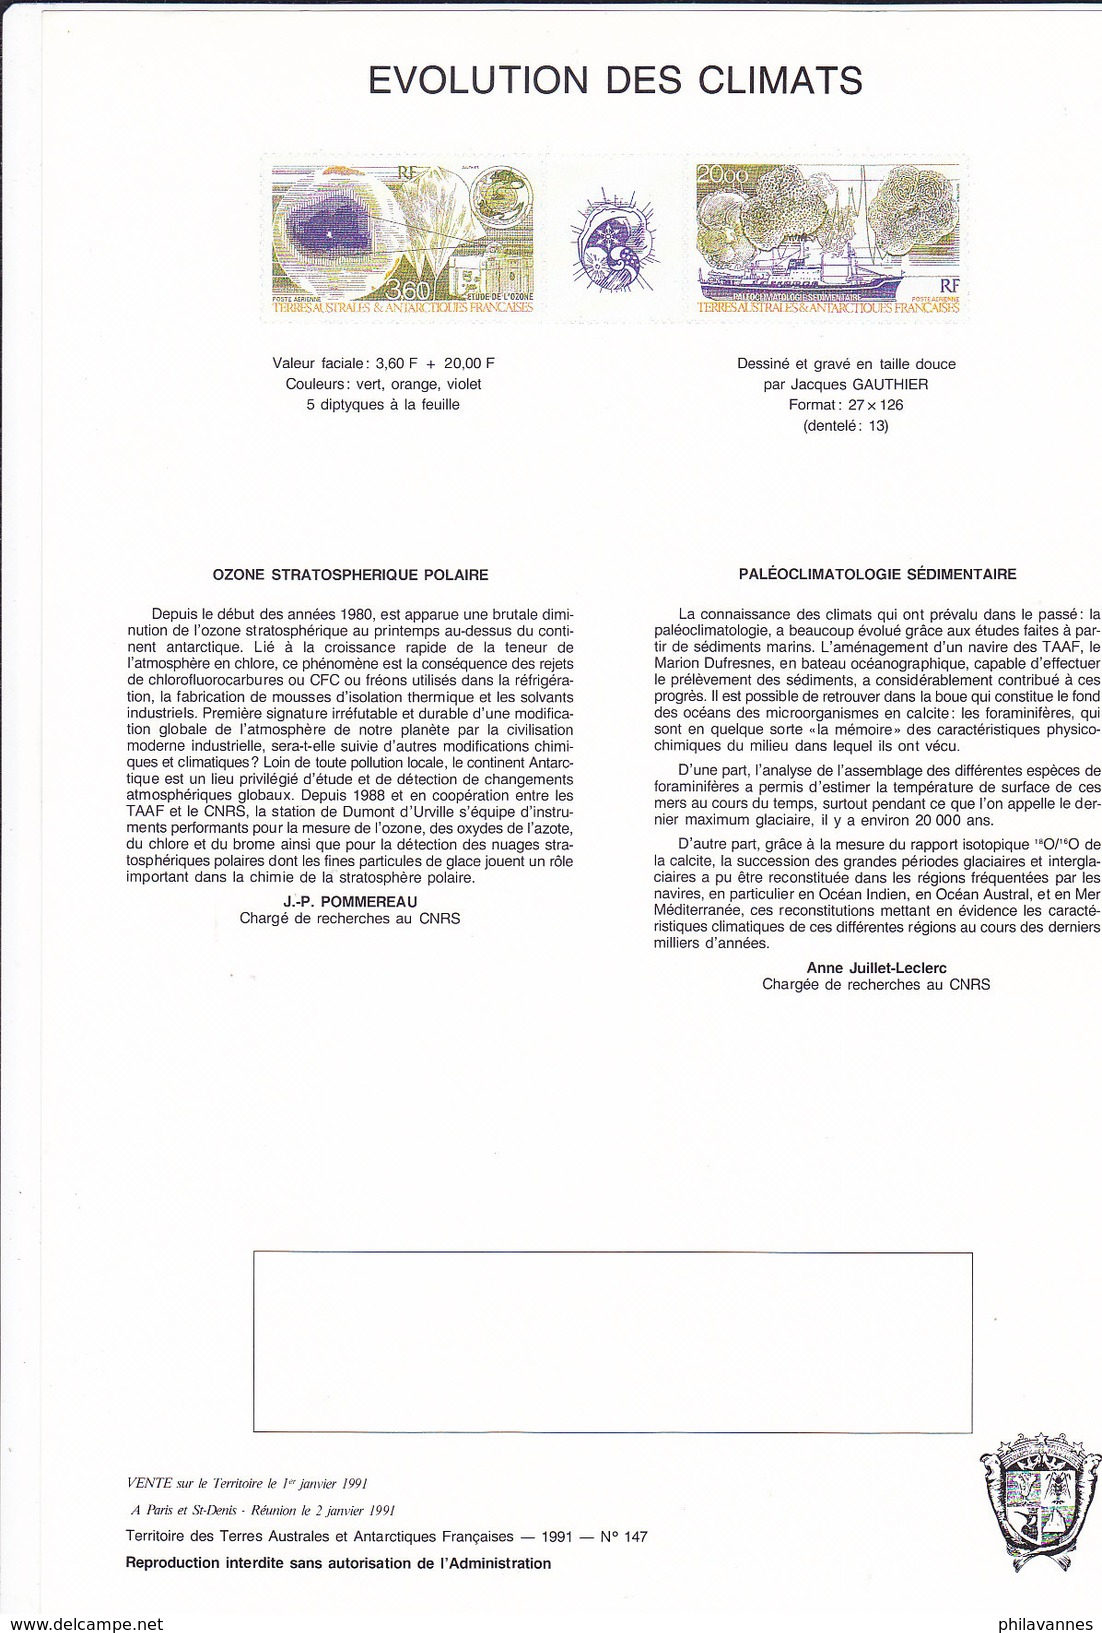 France, TAAF, notices 1991, ( not taaf/2)